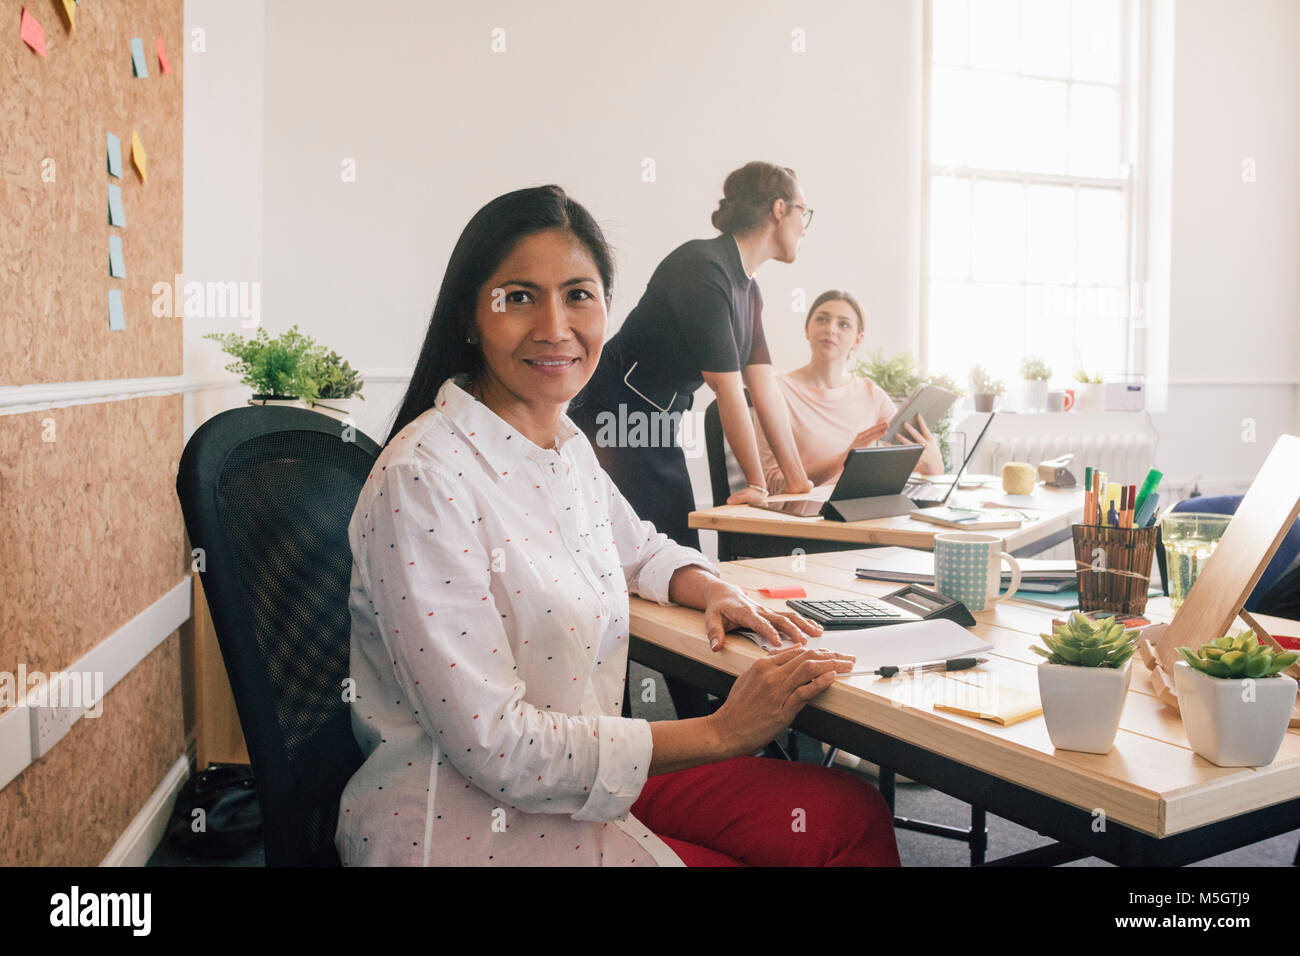 Portrait of a female employee in her workplace. She is sitting at her desk and is smiling at the camera. Stock Photo